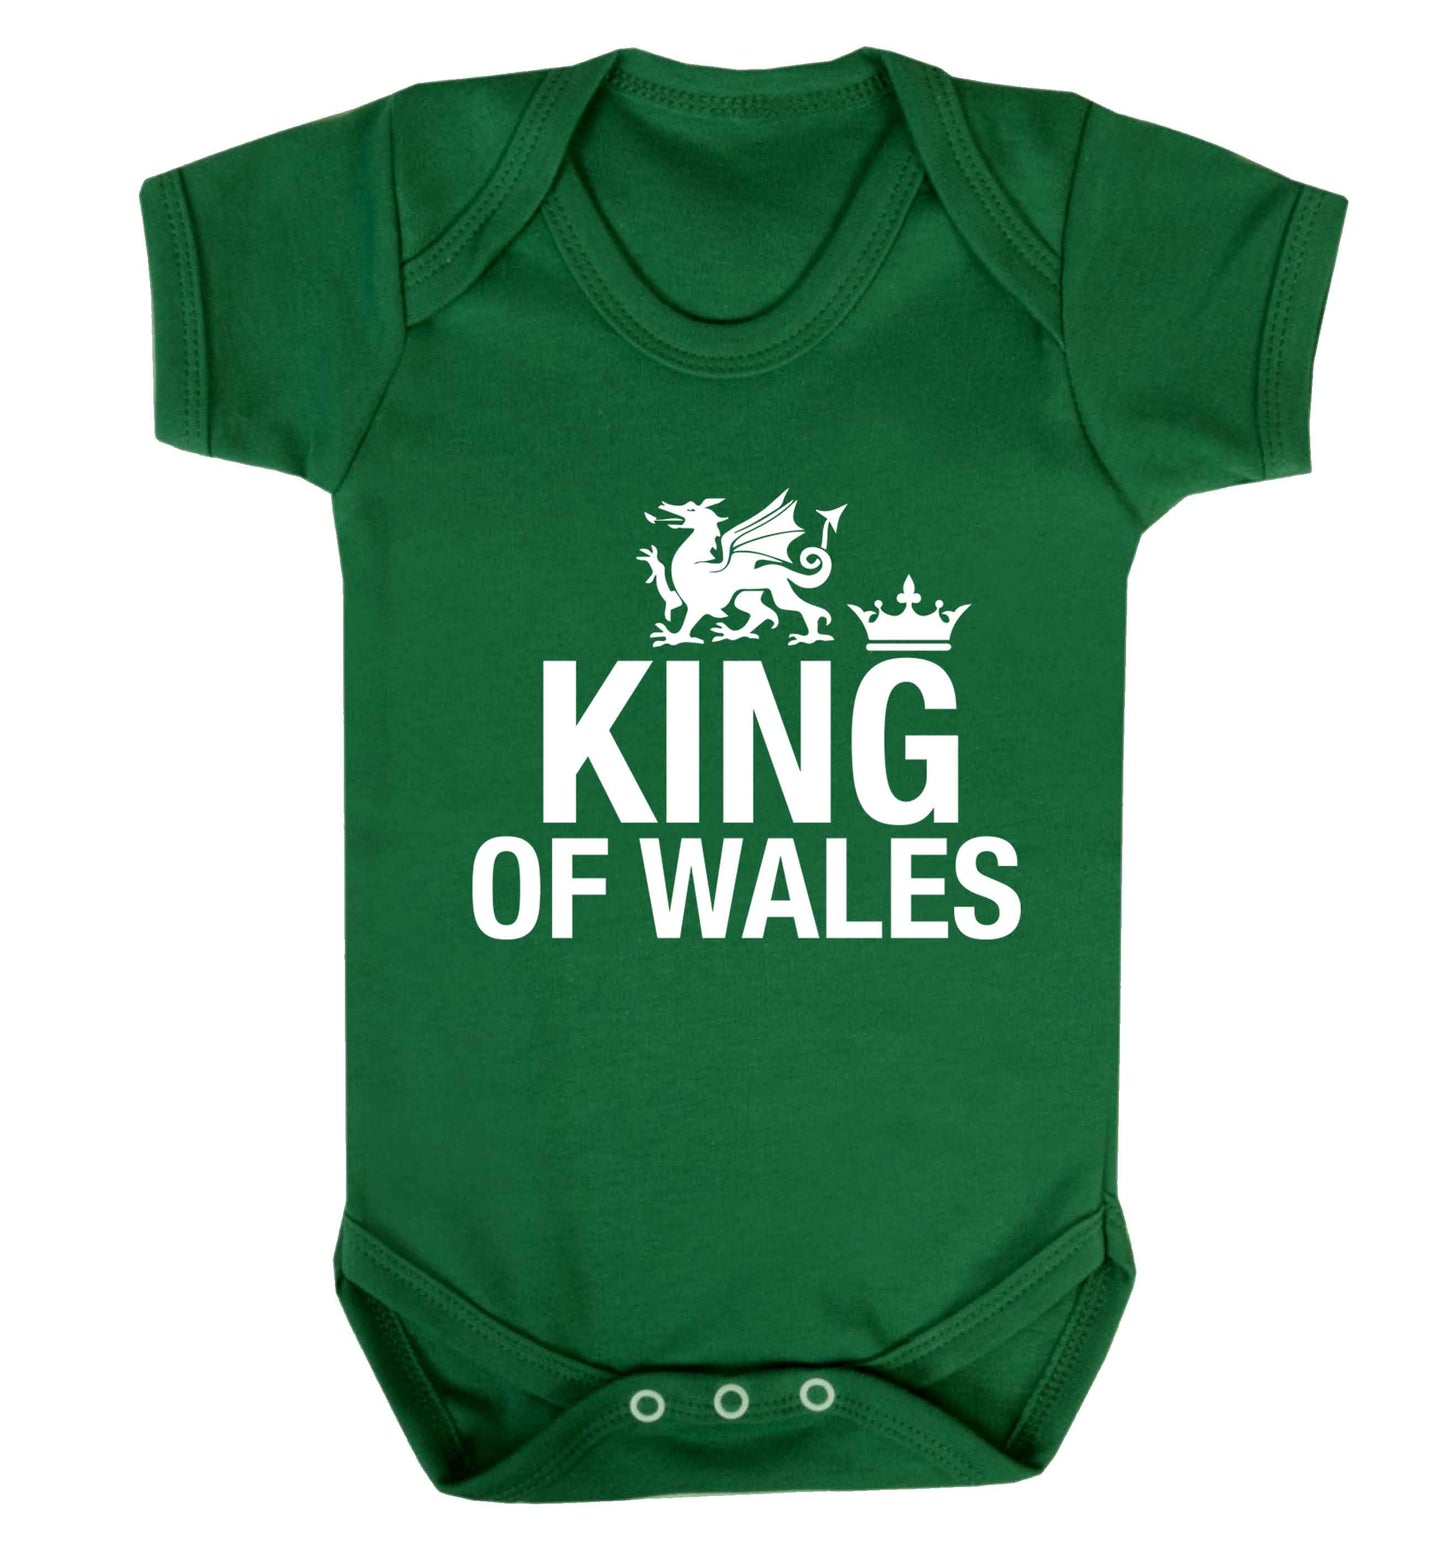 King of Wales Baby Vest green 18-24 months